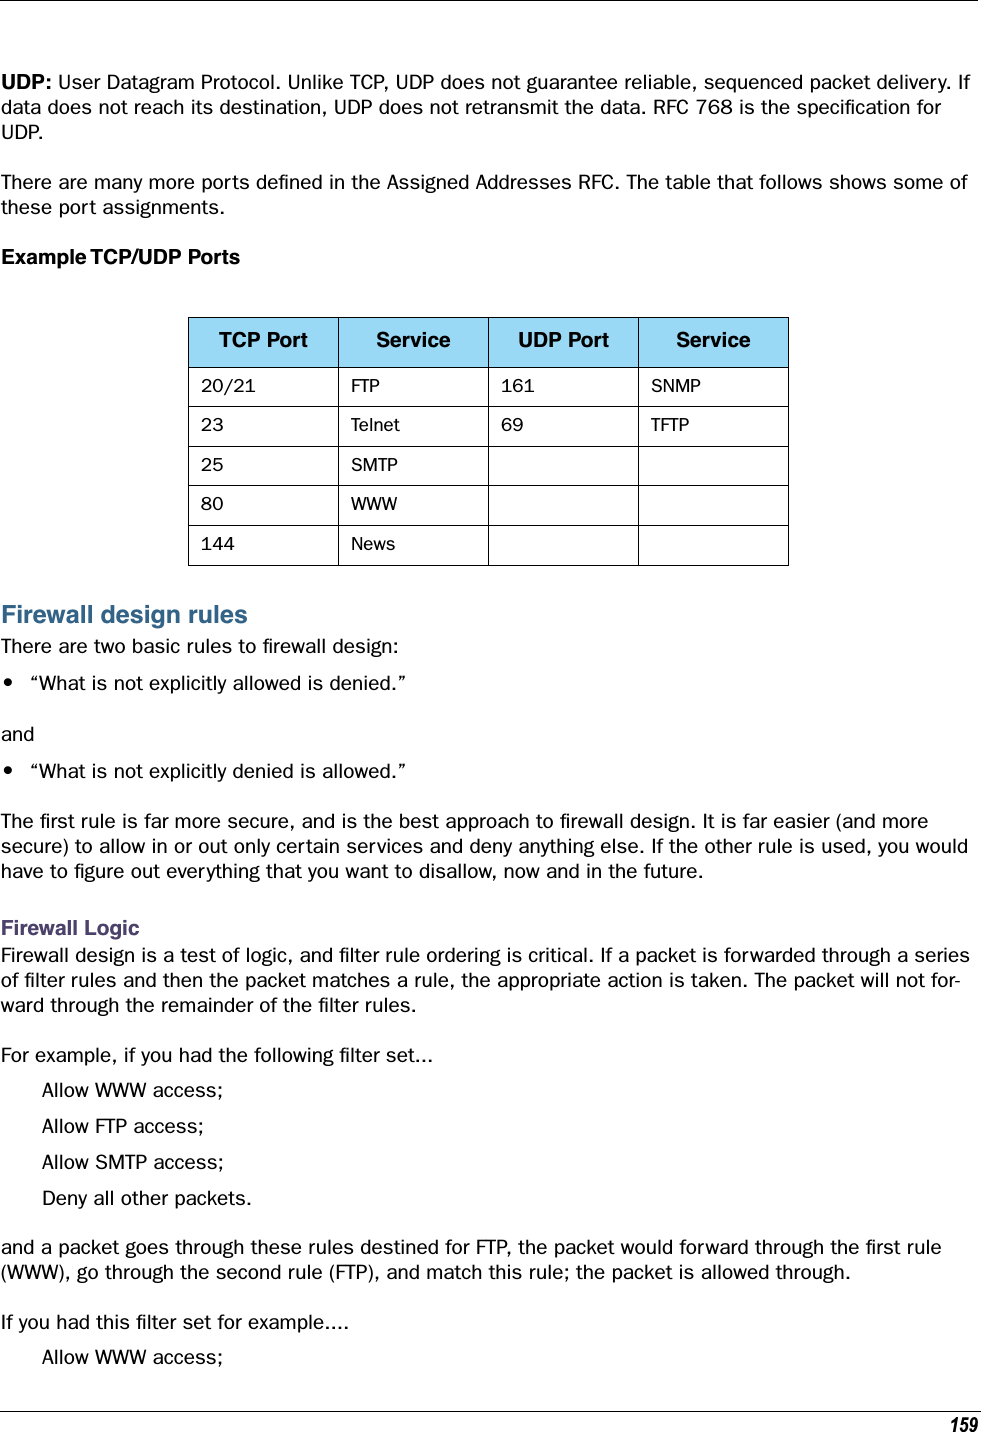 159UDP: User Datagram Protocol. Unlike TCP, UDP does not guarantee reliable, sequenced packet delivery. If data does not reach its destination, UDP does not retransmit the data. RFC 768 is the speciﬁcation for UDP.There are many more ports deﬁned in the Assigned Addresses RFC. The table that follows shows some of these port assignments.Example TCP/UDP PortsFirewall design rulesThere are two basic rules to ﬁrewall design:•“What is not explicitly allowed is denied.”and•“What is not explicitly denied is allowed.”The ﬁrst rule is far more secure, and is the best approach to ﬁrewall design. It is far easier (and more secure) to allow in or out only certain services and deny anything else. If the other rule is used, you would have to ﬁgure out everything that you want to disallow, now and in the future. Firewall LogicFirewall design is a test of logic, and ﬁlter rule ordering is critical. If a packet is forwarded through a series of ﬁlter rules and then the packet matches a rule, the appropriate action is taken. The packet will not for-ward through the remainder of the ﬁlter rules.For example, if you had the following ﬁlter set...Allow WWW access;Allow FTP access;Allow SMTP access;Deny all other packets.and a packet goes through these rules destined for FTP, the packet would forward through the ﬁrst rule (WWW), go through the second rule (FTP), and match this rule; the packet is allowed through.If you had this ﬁlter set for example....Allow WWW access;TCP Port Service UDP Port Service20/21 FTP 161 SNMP23 Telnet 69 TFTP25 SMTP80 WWW144 News